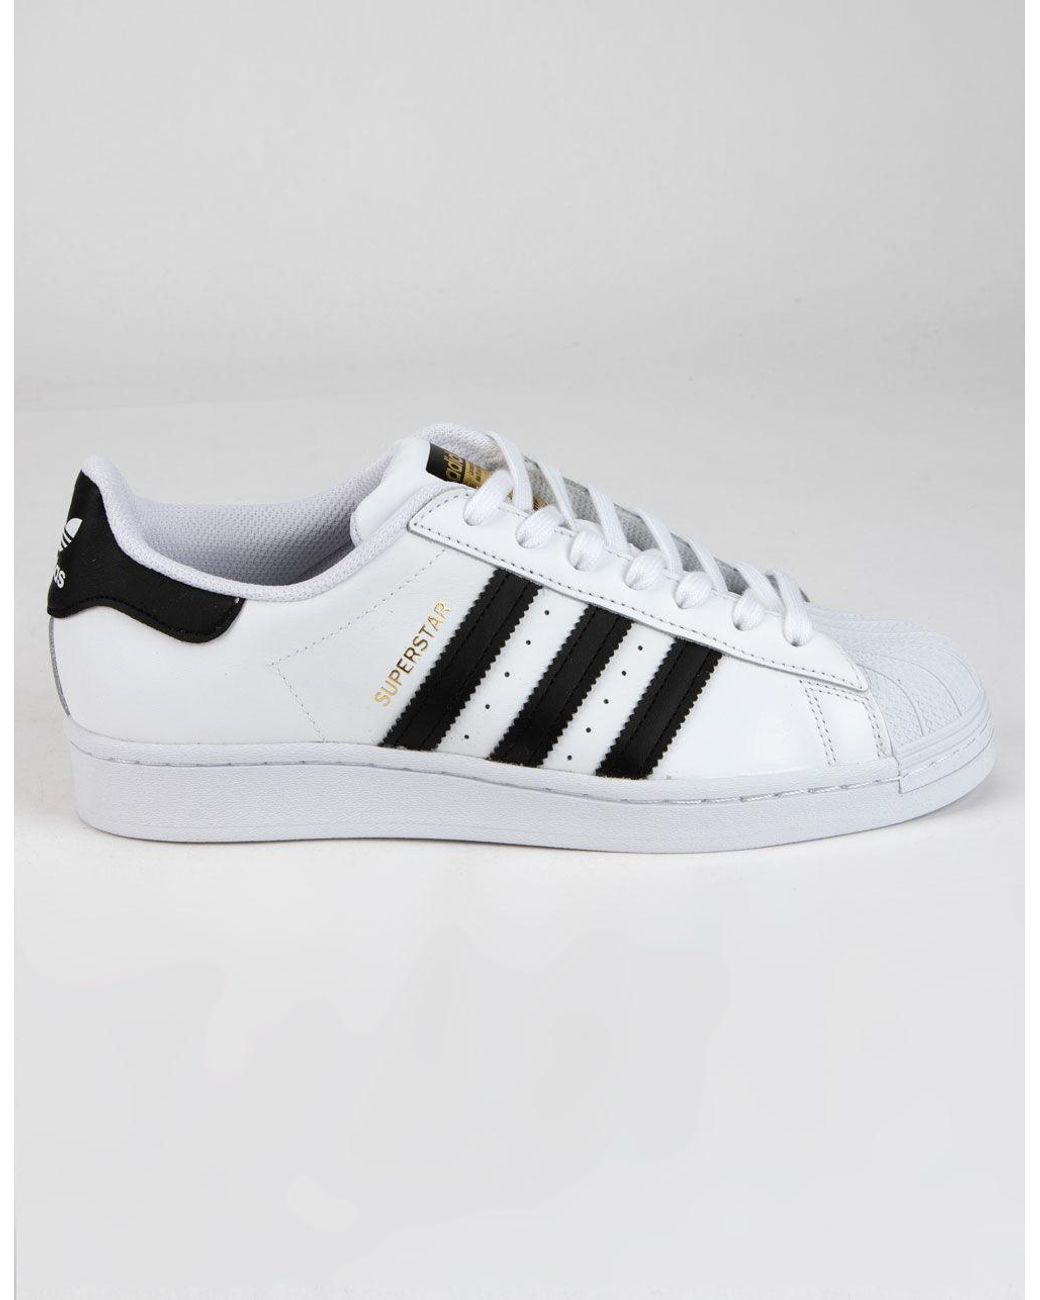 adidas Leather Superstar Shoes in White/Black (White) - Lyst